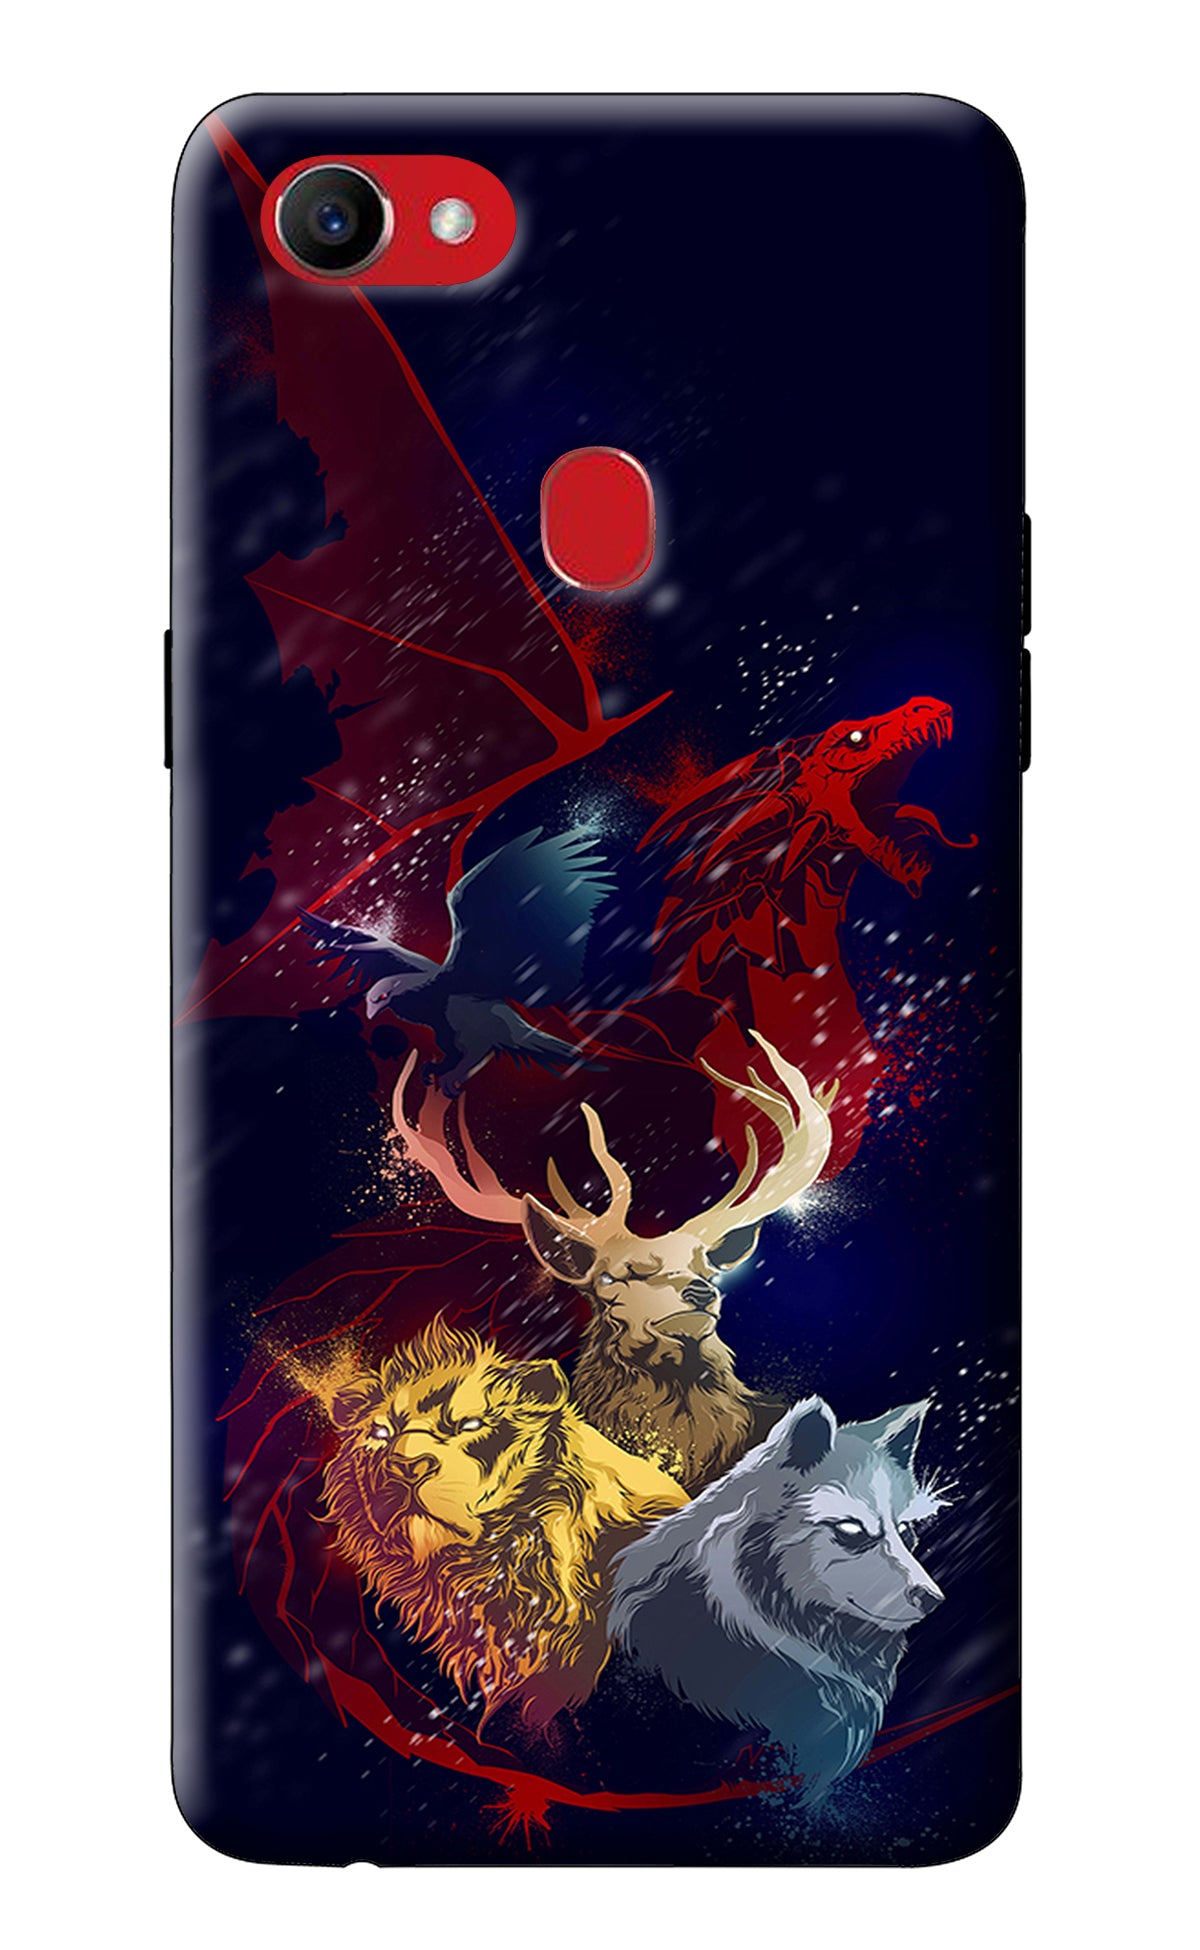 Game Of Thrones Oppo F7 Back Cover